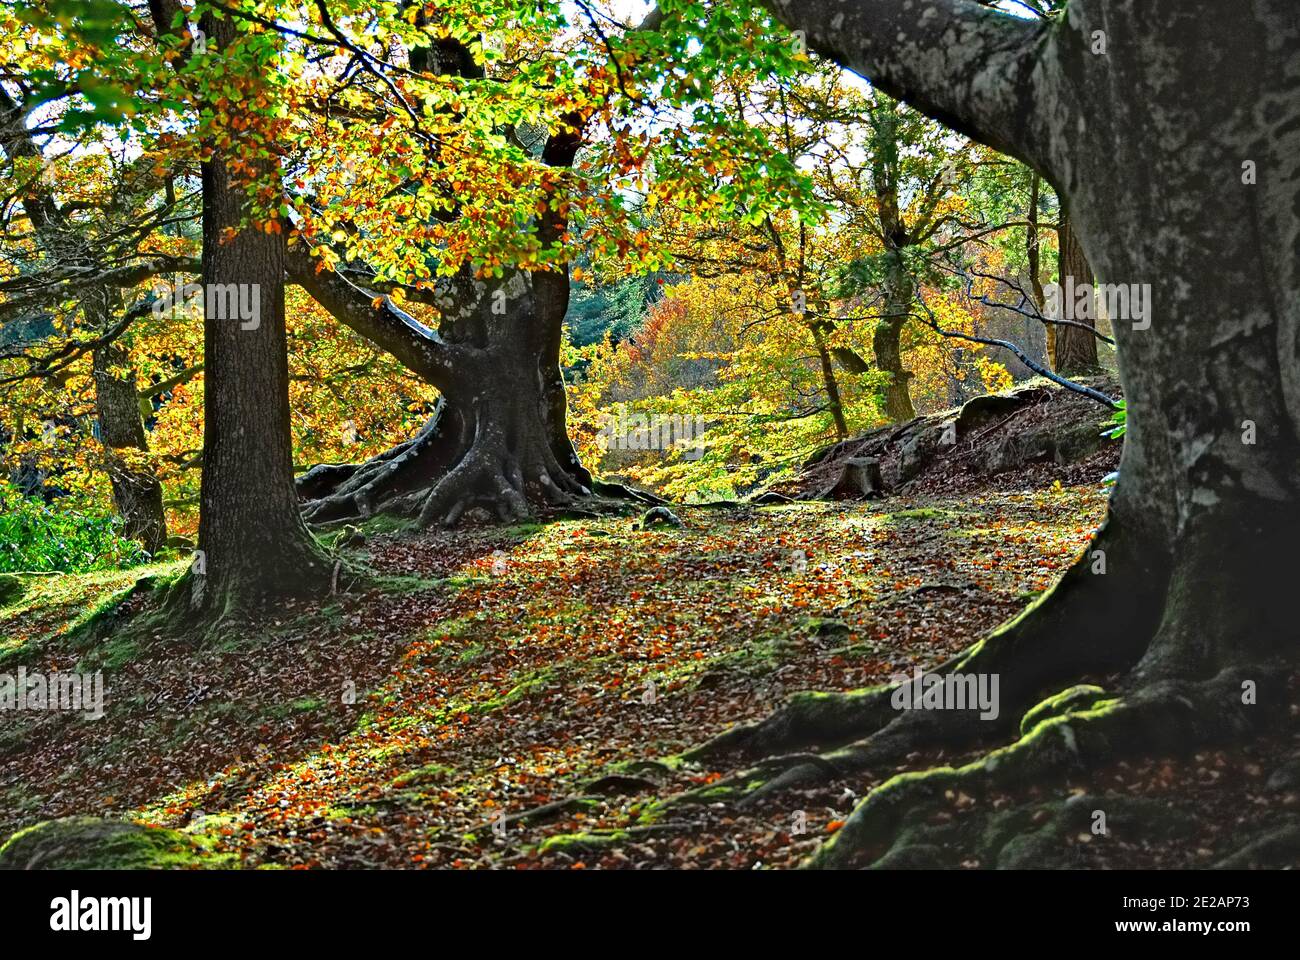 Autumn in Crathes Castle Woods with sunlight filtering through the trees Stock Photo